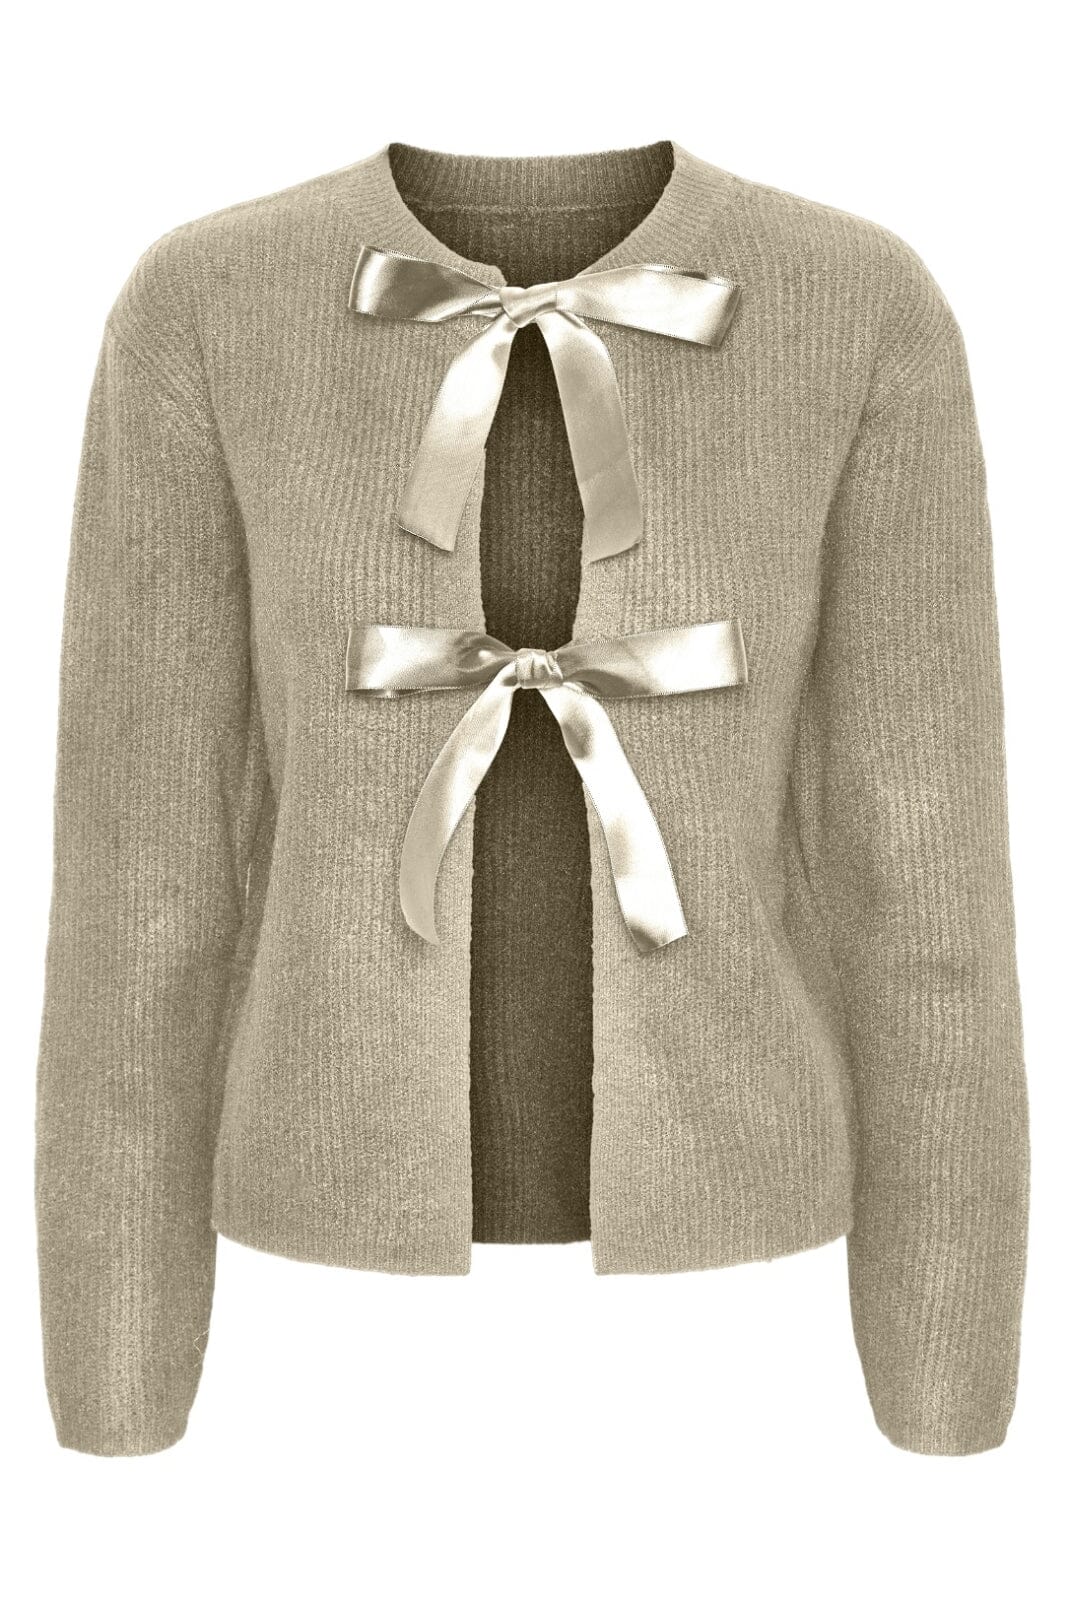 Pieces - Pcrilly Ls Reversible Bow Knit - 4674406 White Pepper Dtm Woven Bow Cardigans 